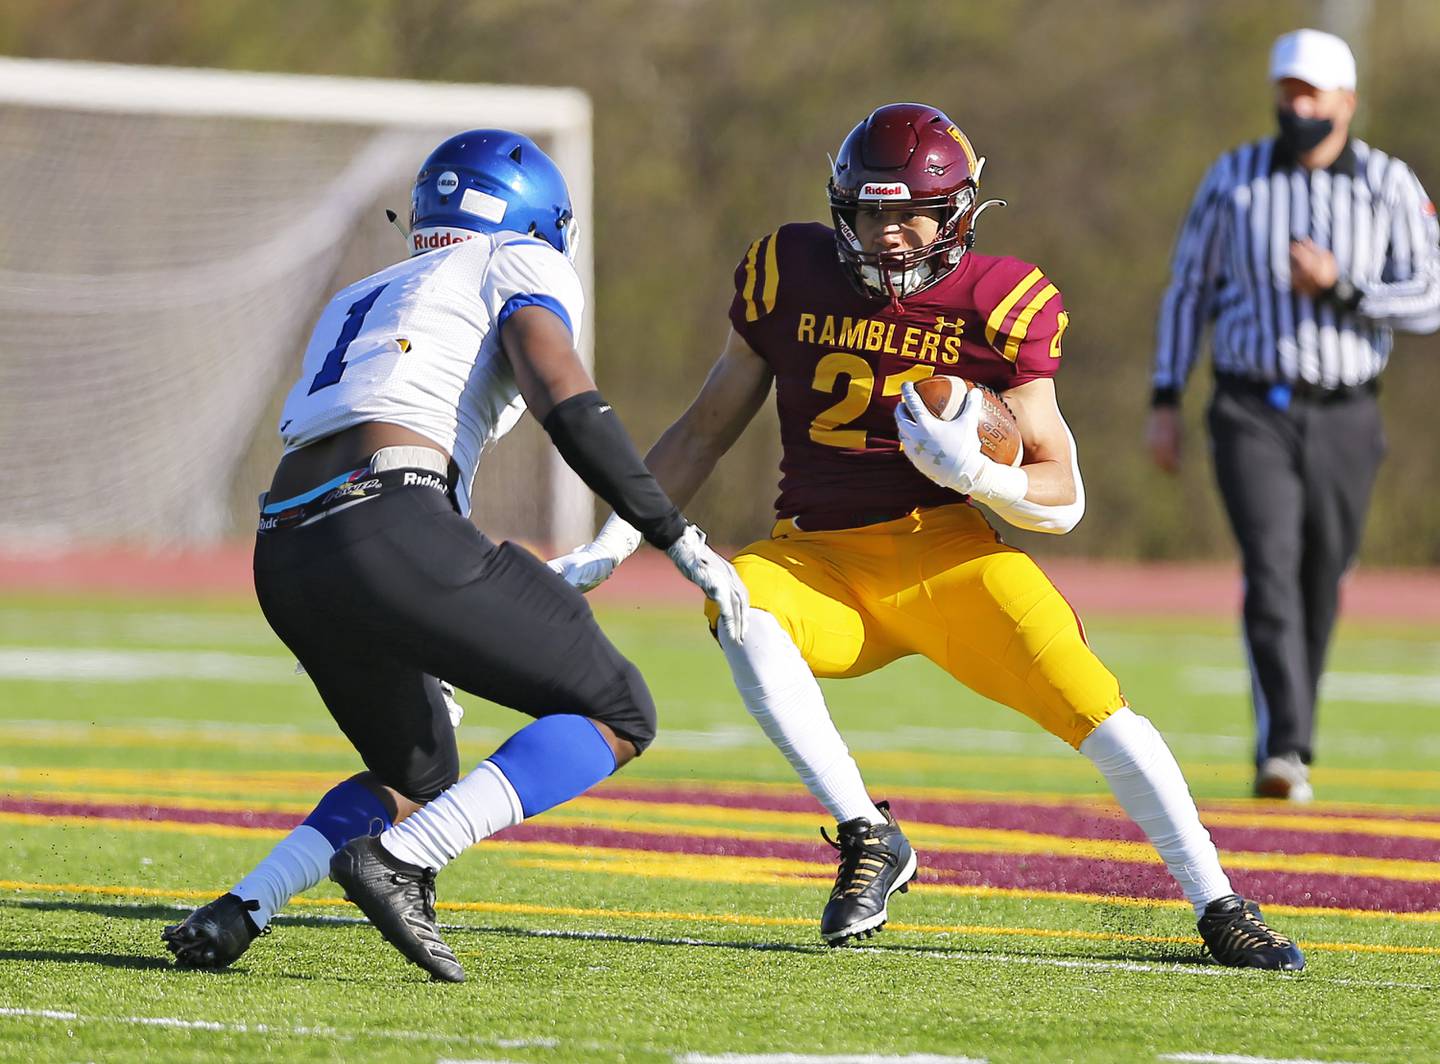 Loyola Academy's Vaughn Pemberton runs the ball as the Phillips Academy Wildcats faced the Loyola Academy Ramblers on Friday, April 16, 2021 in Wilmette, IL. Loyola won 30-0.